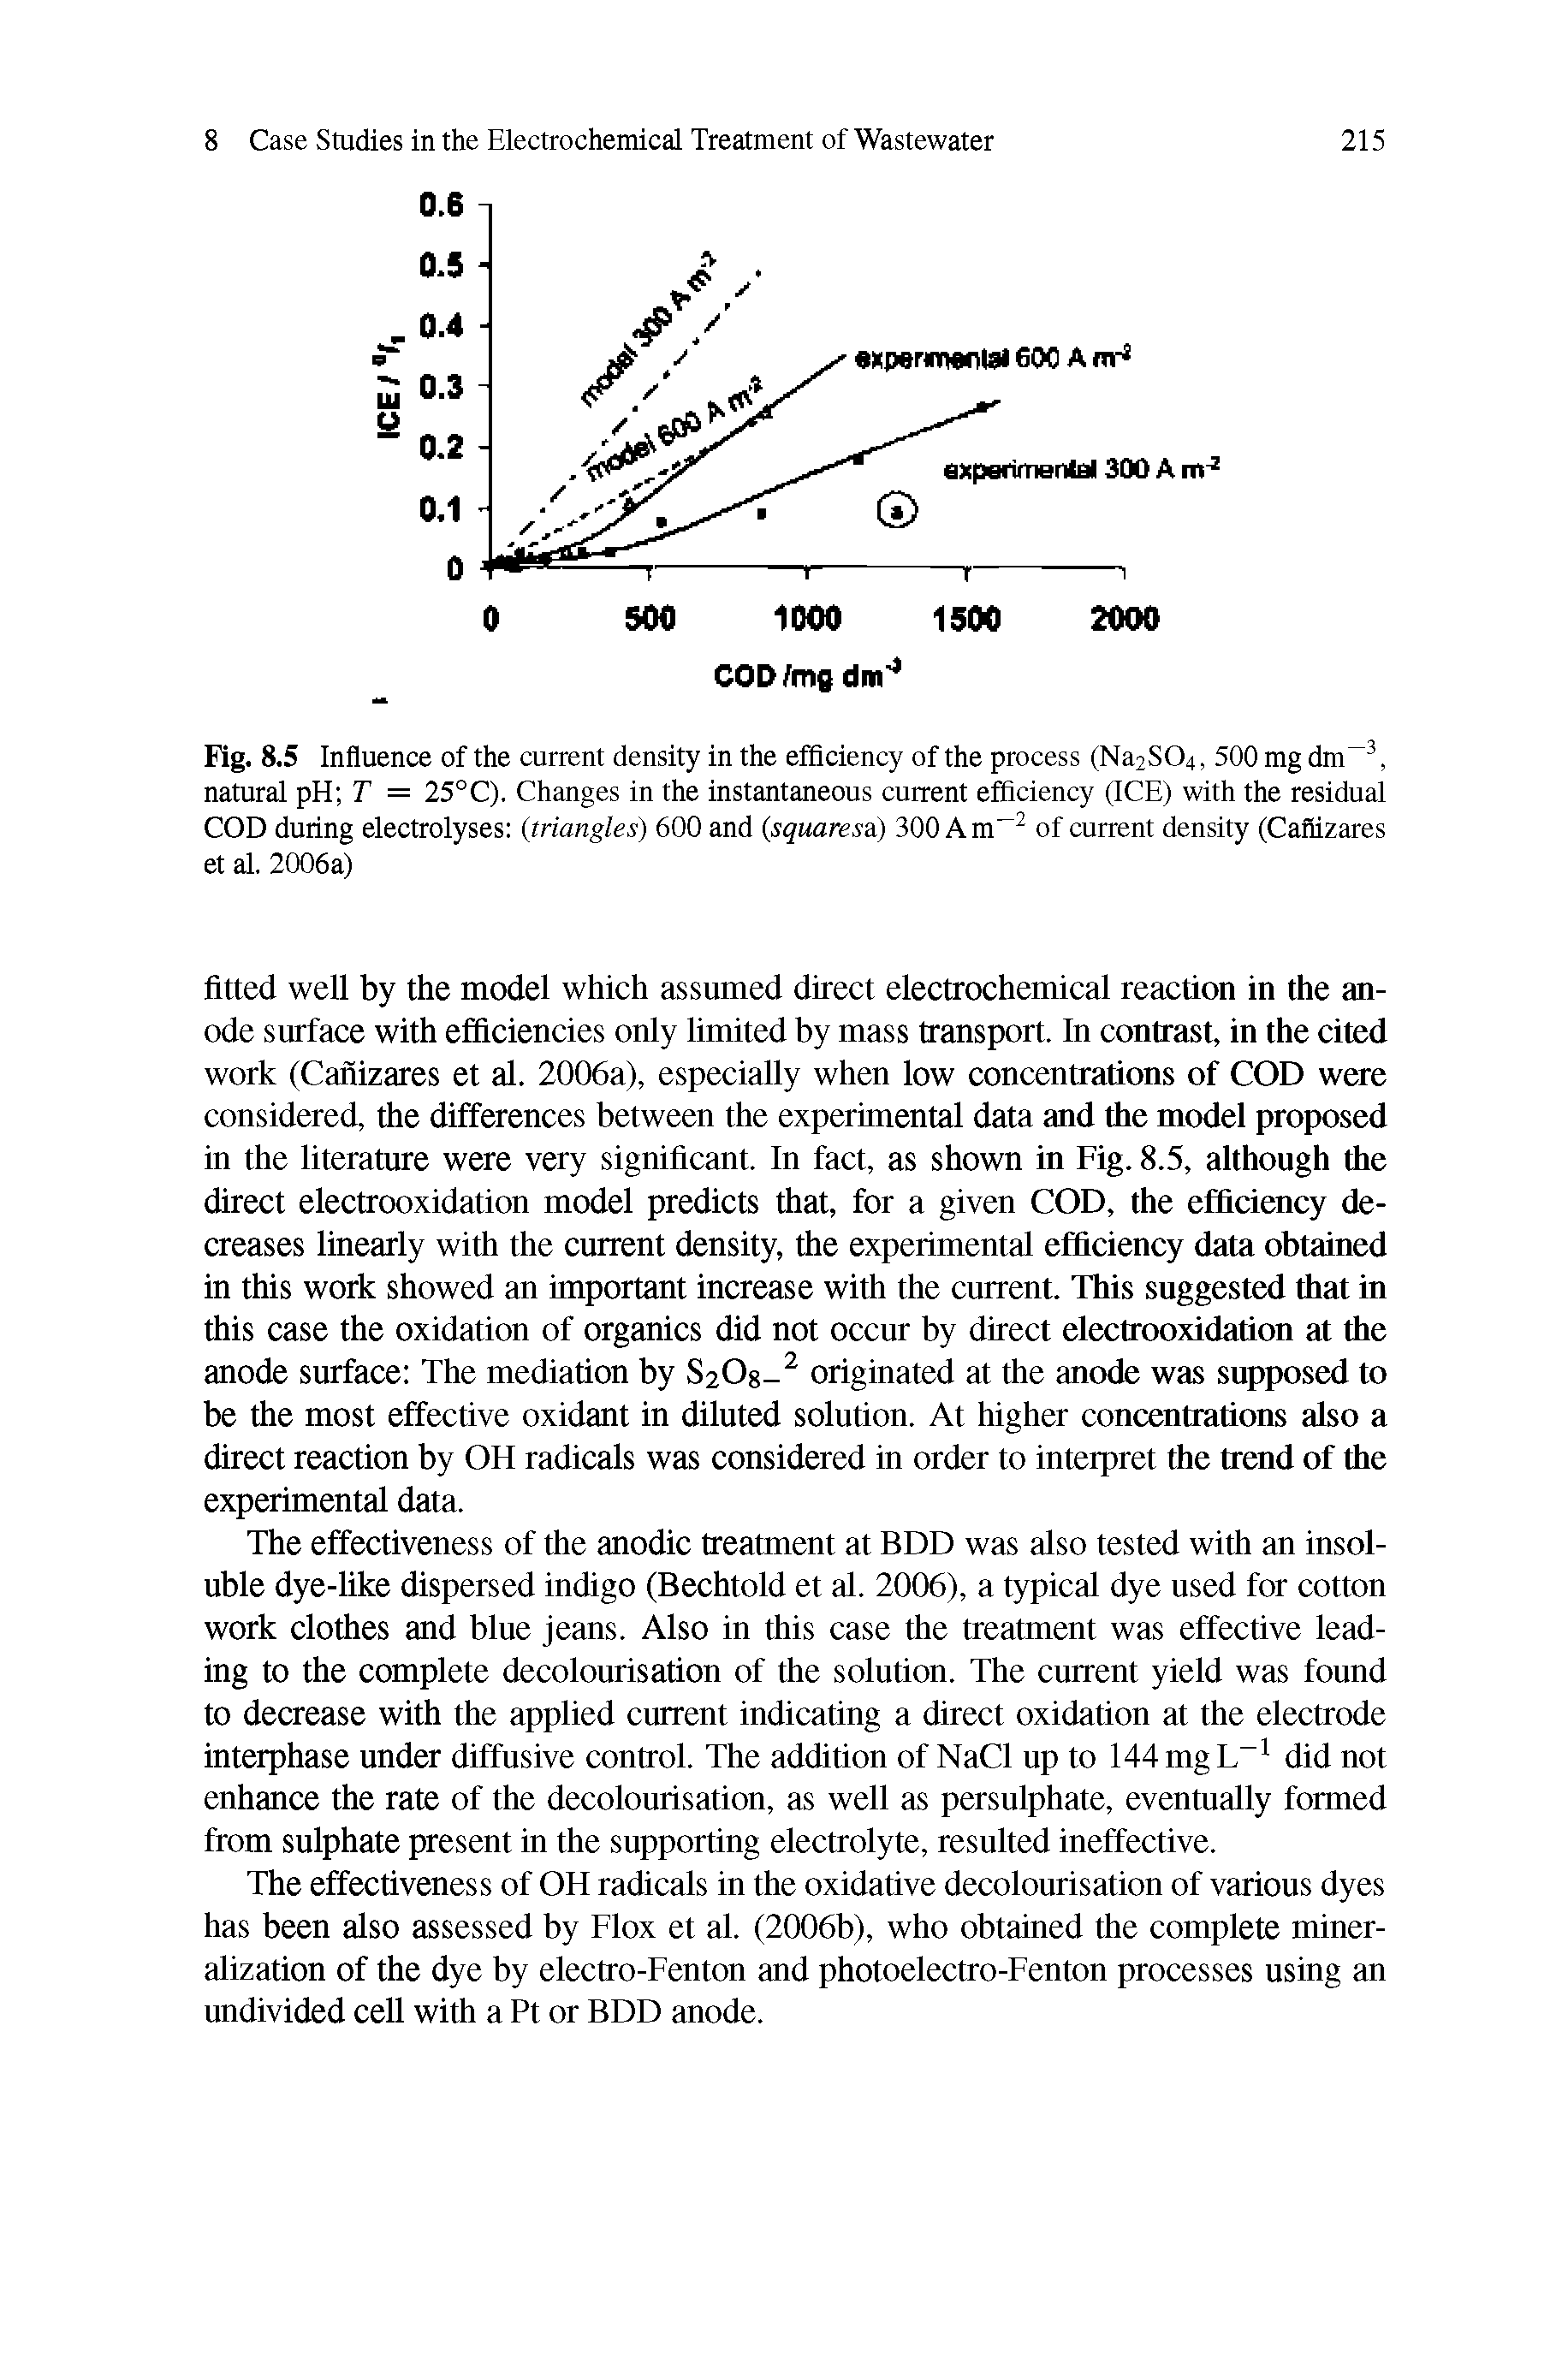 Fig. 8.5 Influence of the current density in the efficiency of the process (Na2SC>4, 500 mg dm 3, natural pH T = 25°C). Changes in the instantaneous current efficiency (ICE) with the residual COD during electrolyses (triangles) 600 and (squaresa) 300 A nW2 of current density (Cafiizares et al. 2006a)...